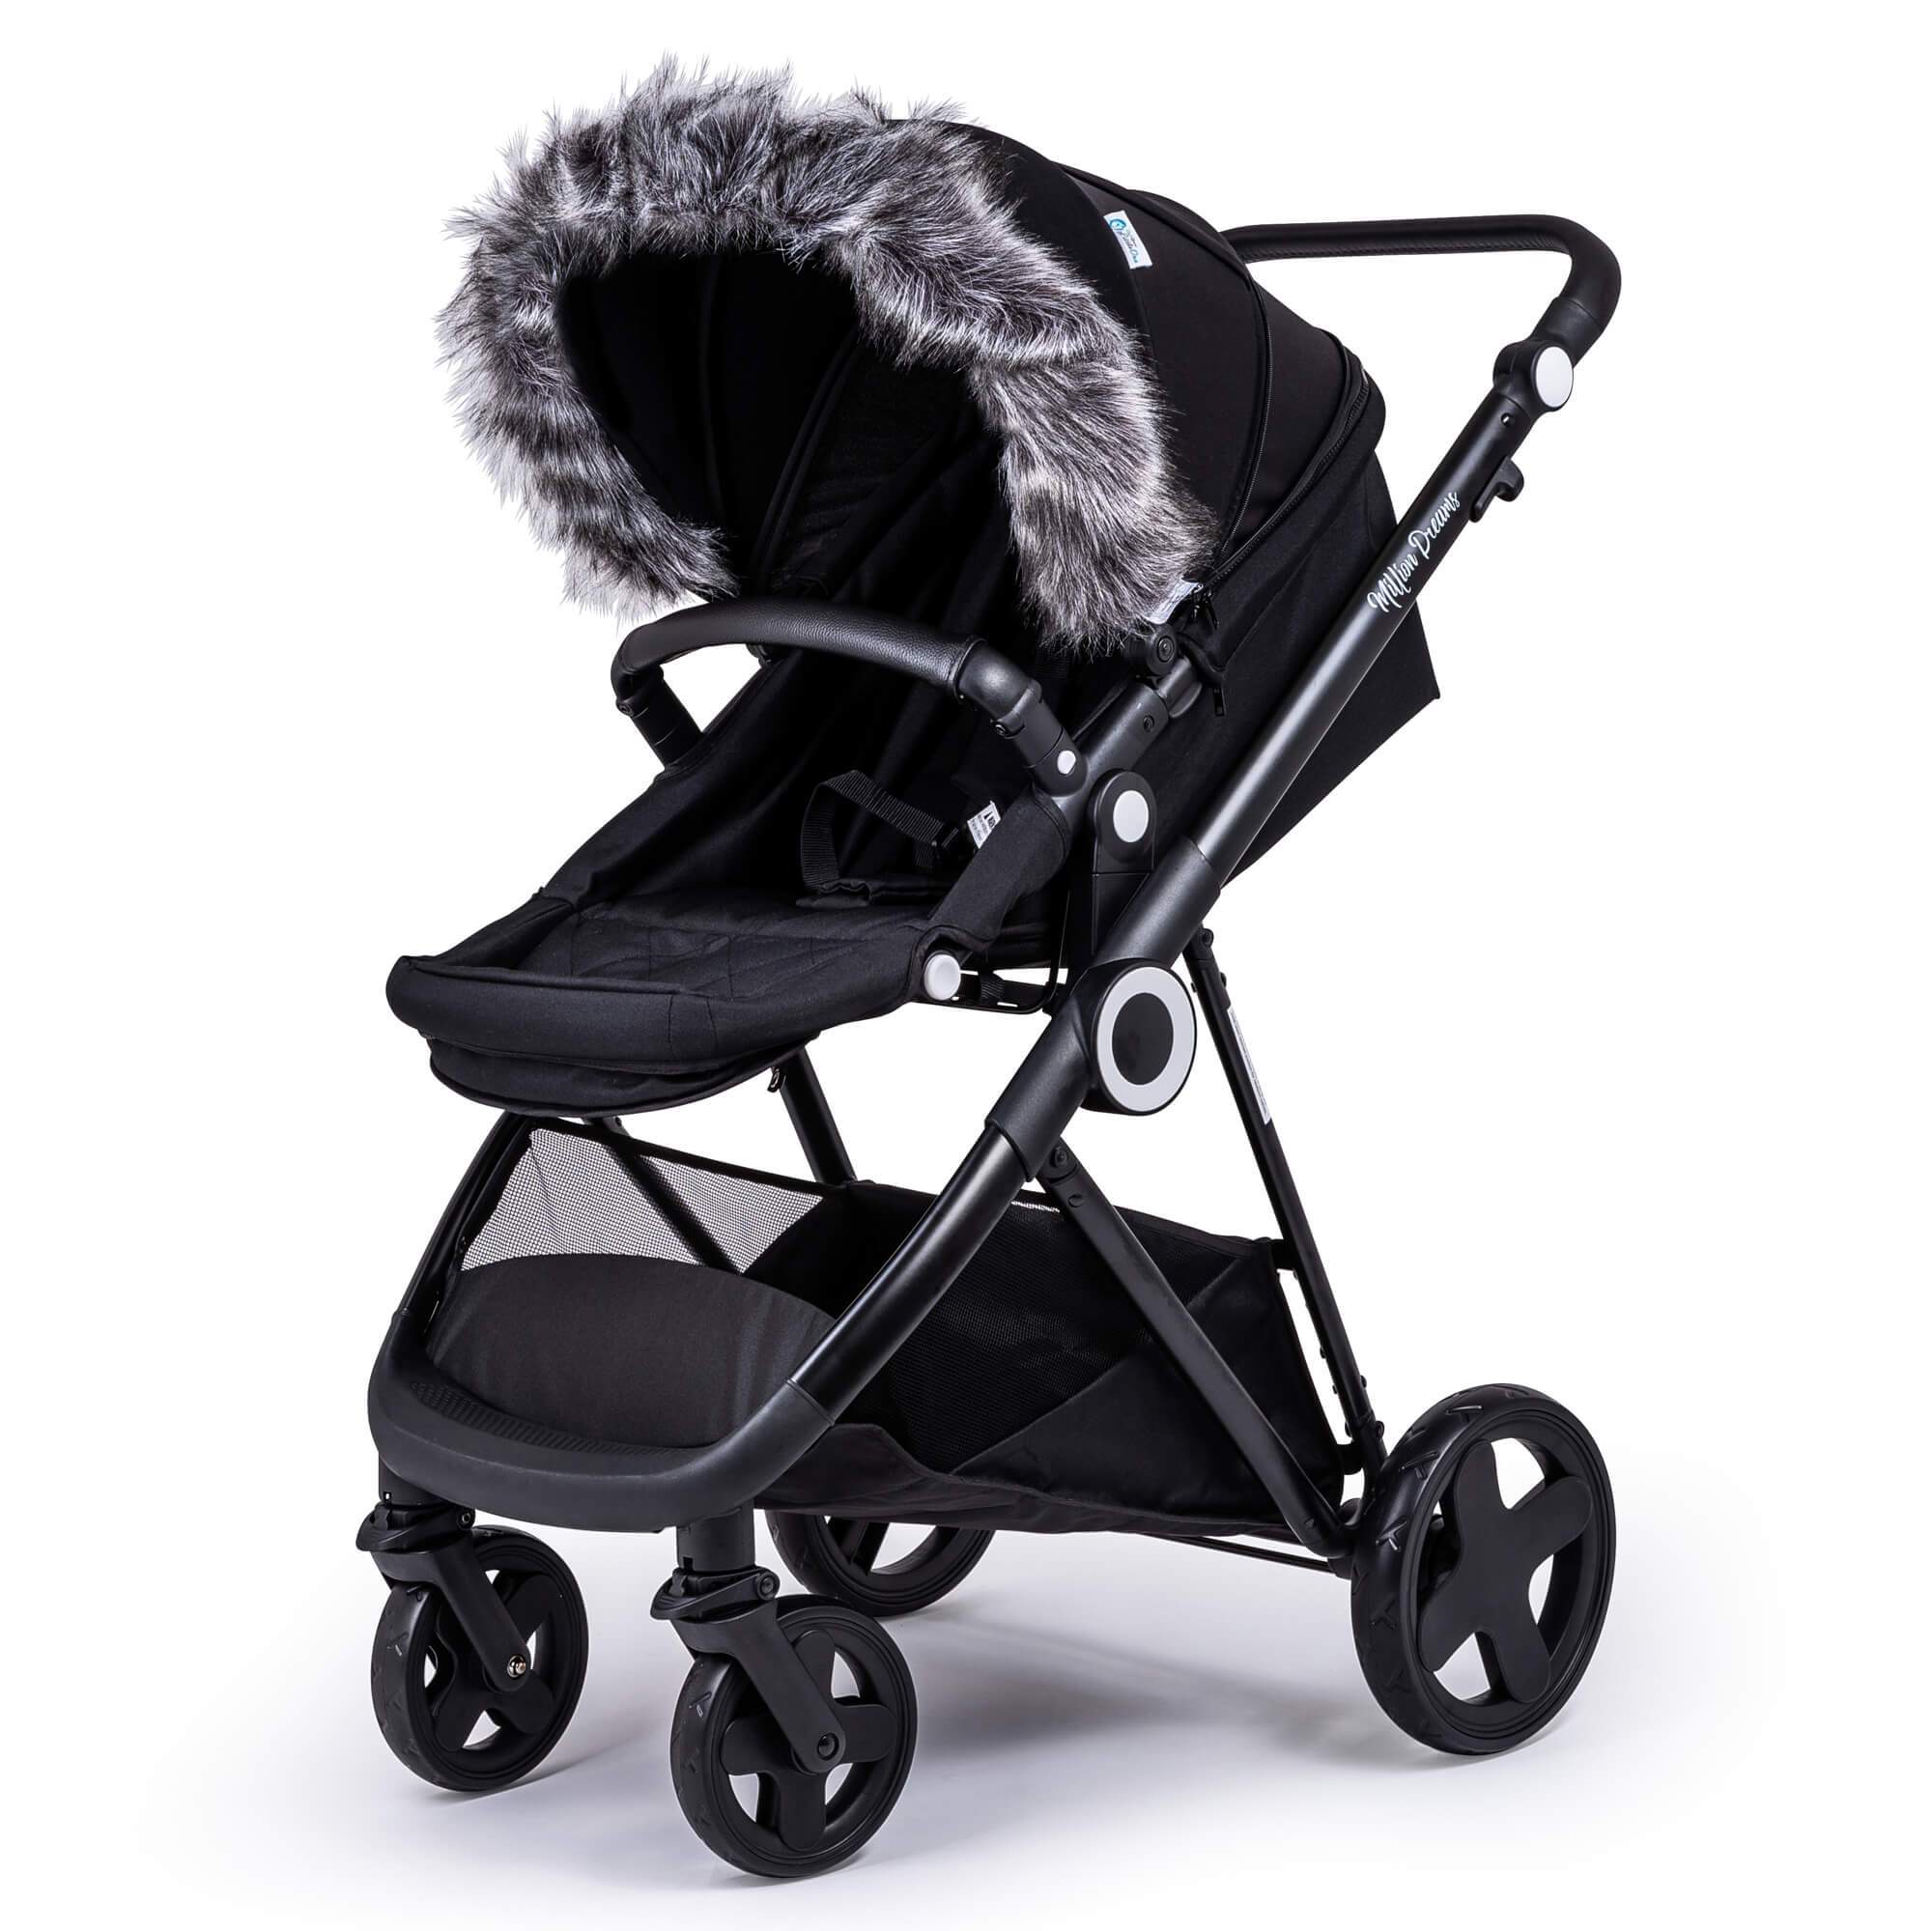 Pram Fur Hood Trim Attachment for Pushchair - Dark Grey / Fits All Models | For Your Little One